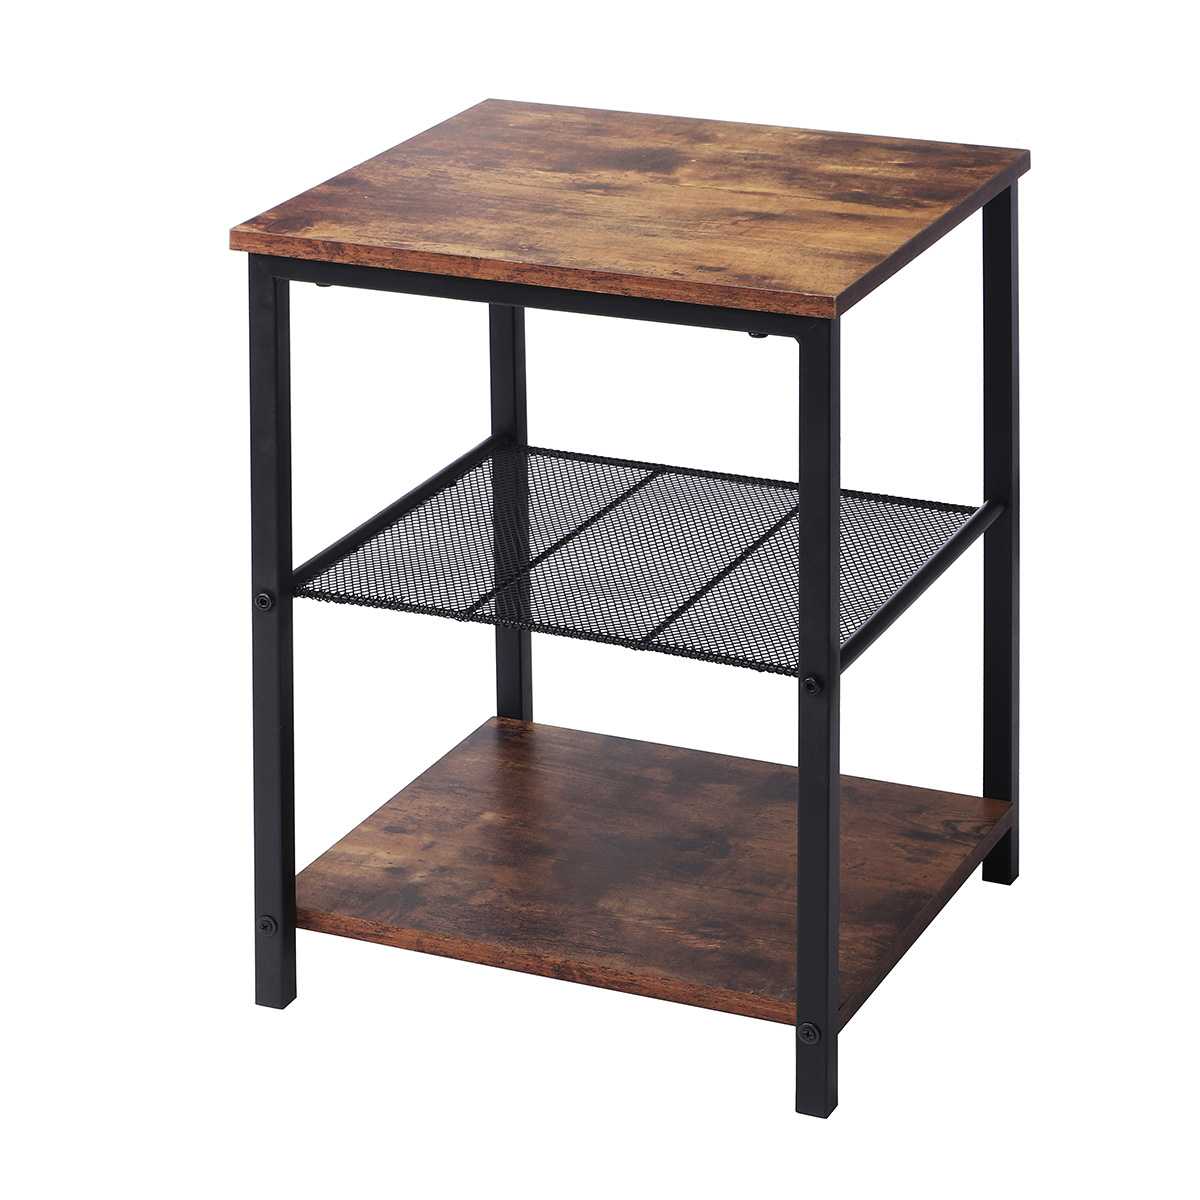 Nightstands-2-3-Tier-Side-Table-with-Adjustable-Shelf-Industrial-End-Table-for-Small-Space-in-Living-1918210-4